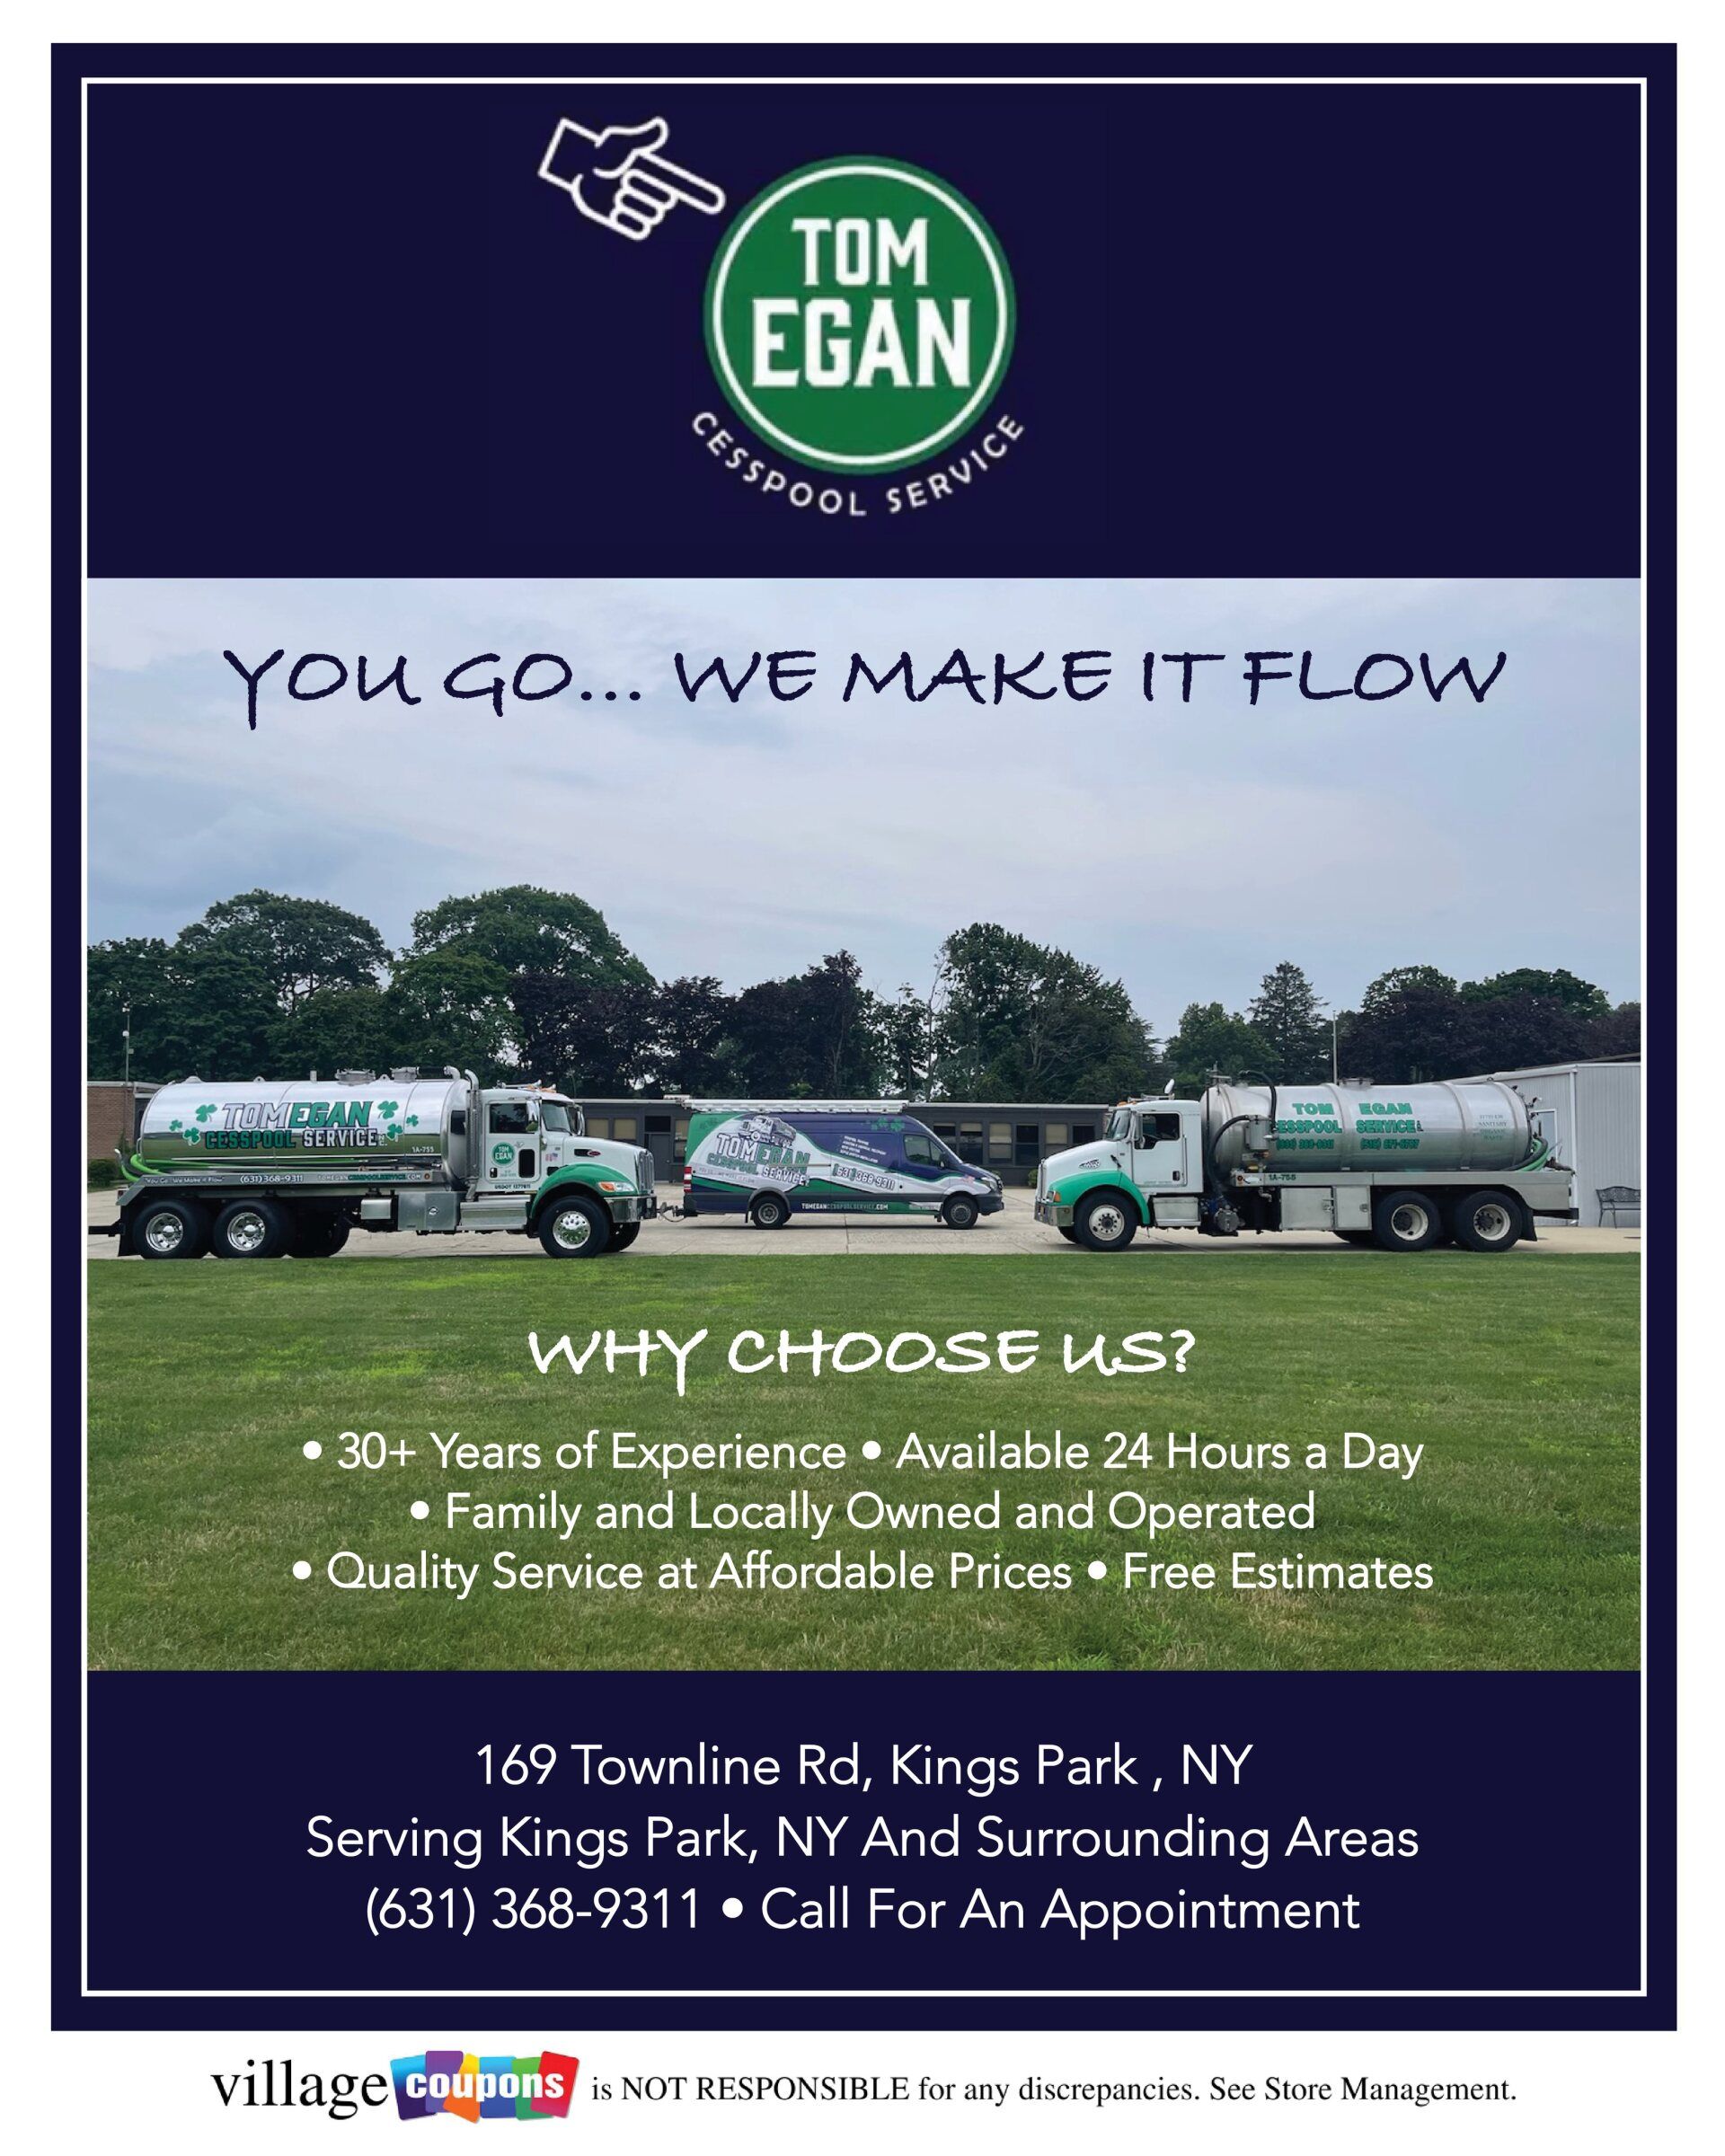 An advertisement for tom egan says you go we make it flow